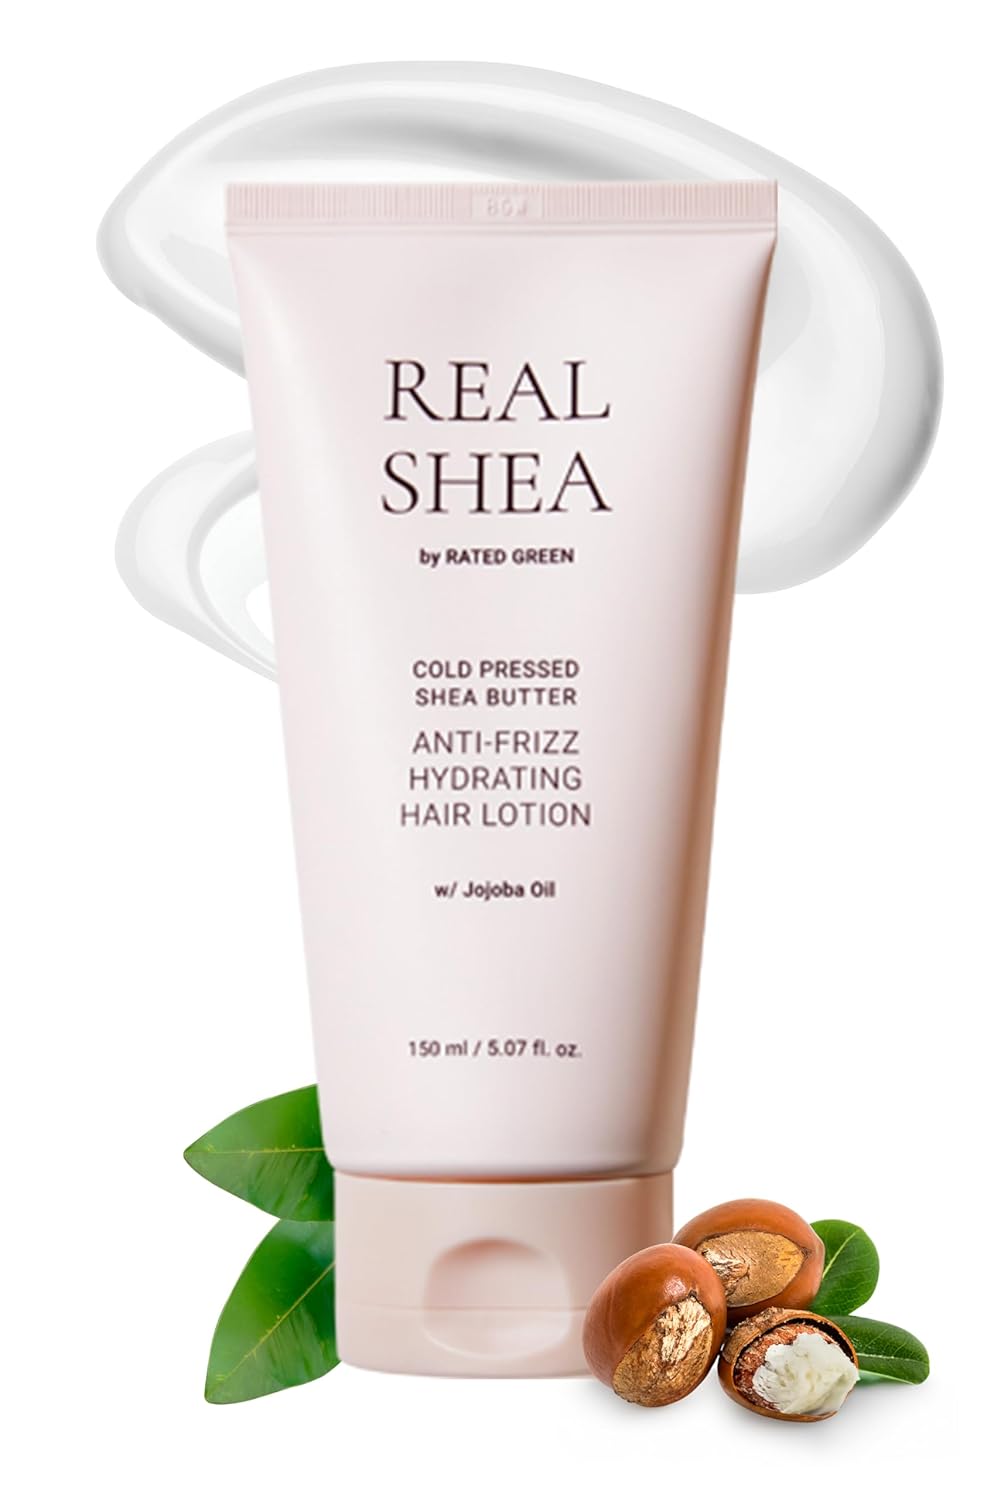 RATED GREEN Real Shea Anti Frizz Hydrating Hair Lotion | Shea Butter Hair Moisturizer & Hair Care Cream | Daily Hair Moisturizer & Anti Frizz Hair Products for Frizzy Hair 5.07 fl oz